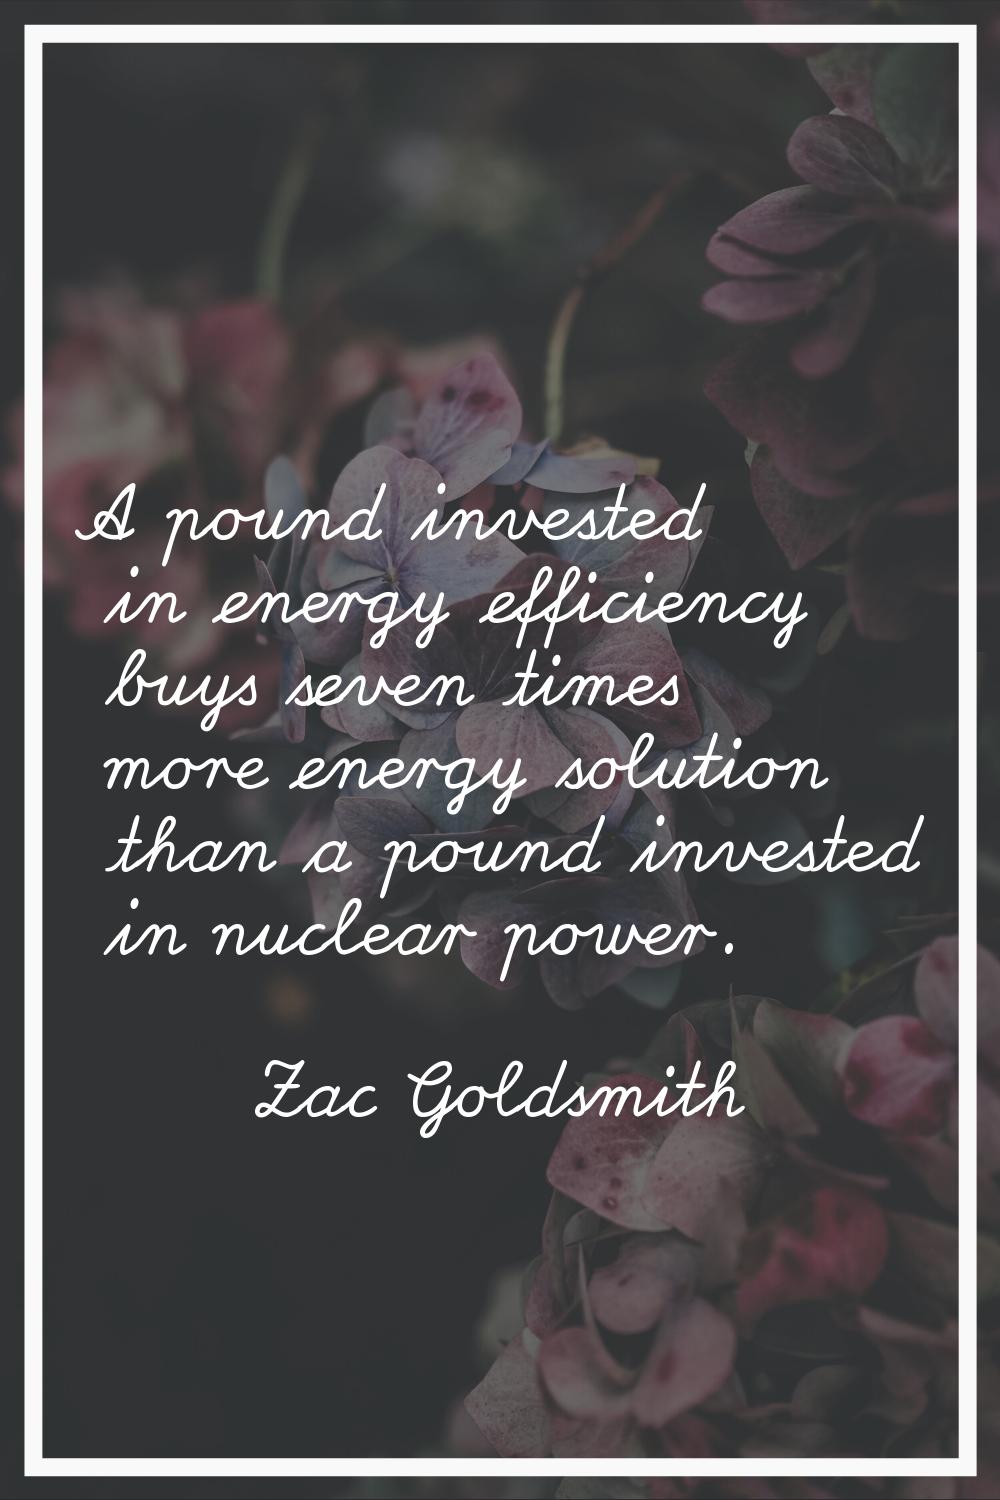 A pound invested in energy efficiency buys seven times more energy solution than a pound invested i